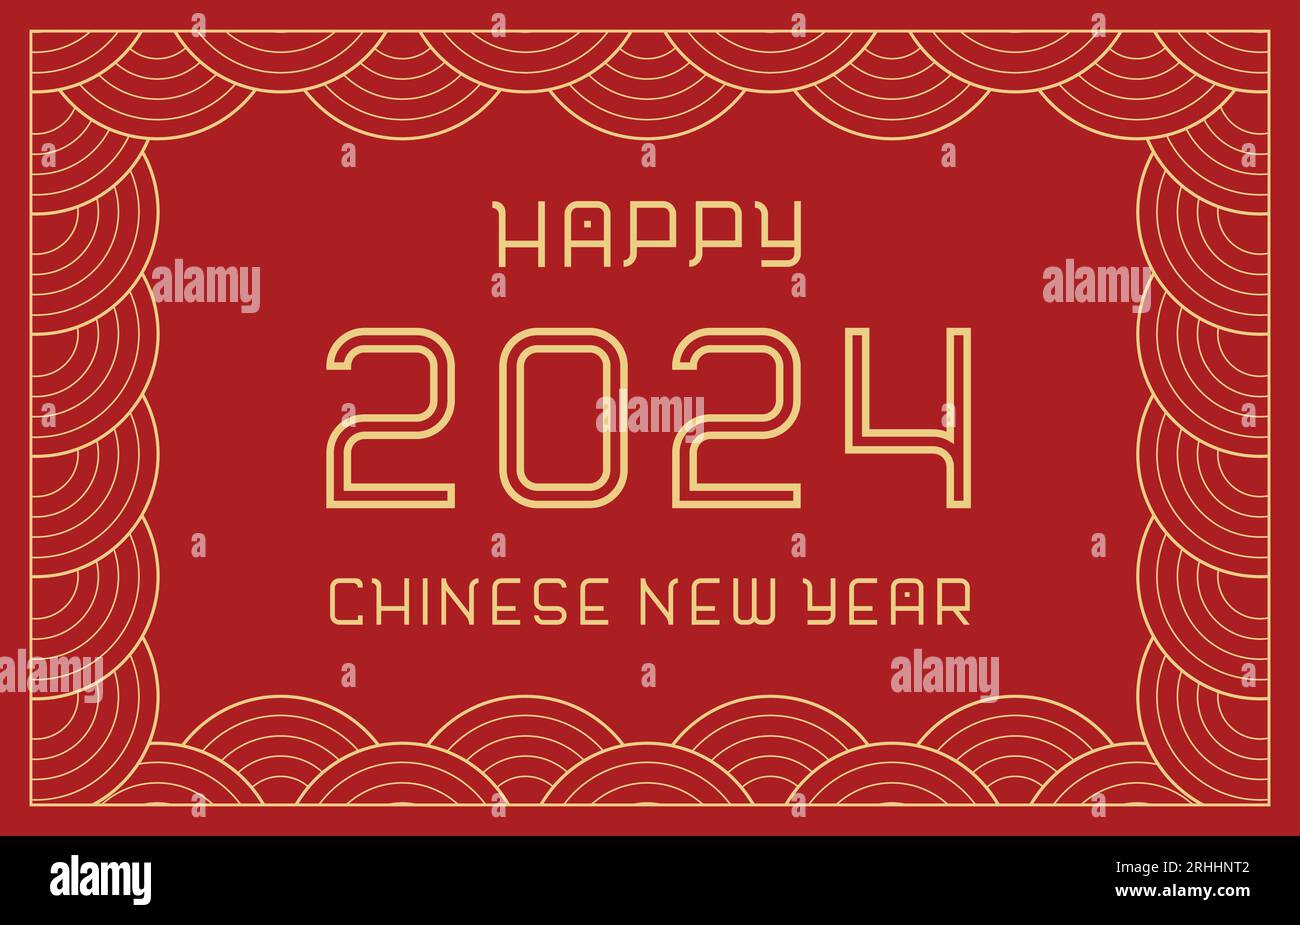 Set Of Flat Design Chinese New Year Banners. The Set Can Be used